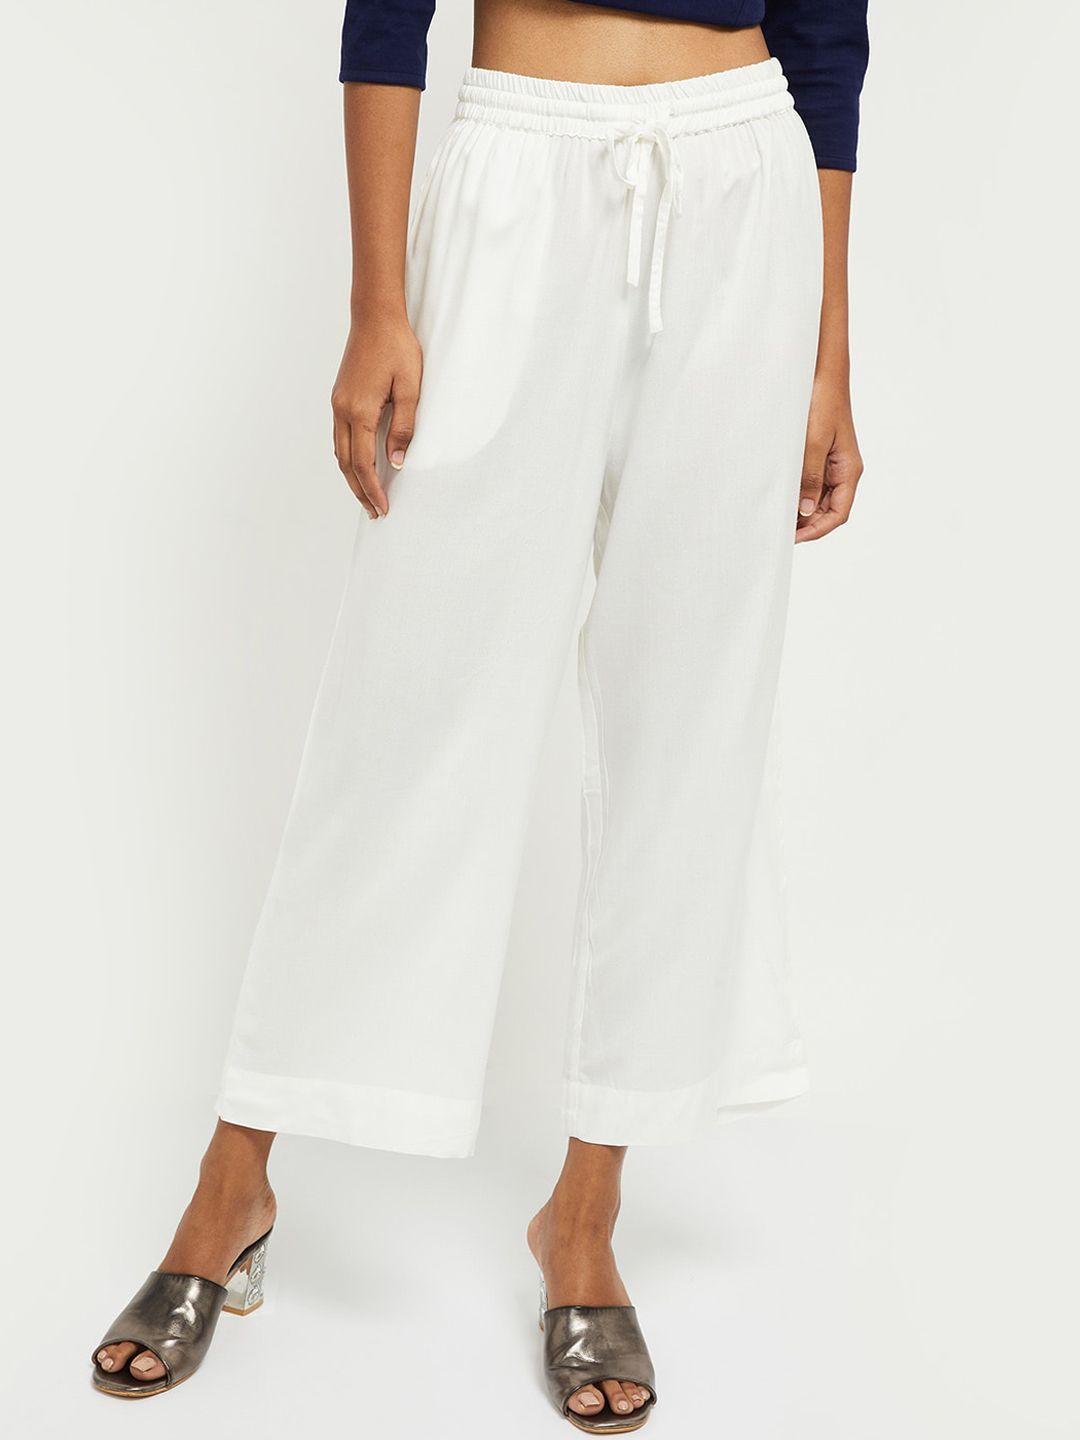 max women off white culottes trousers